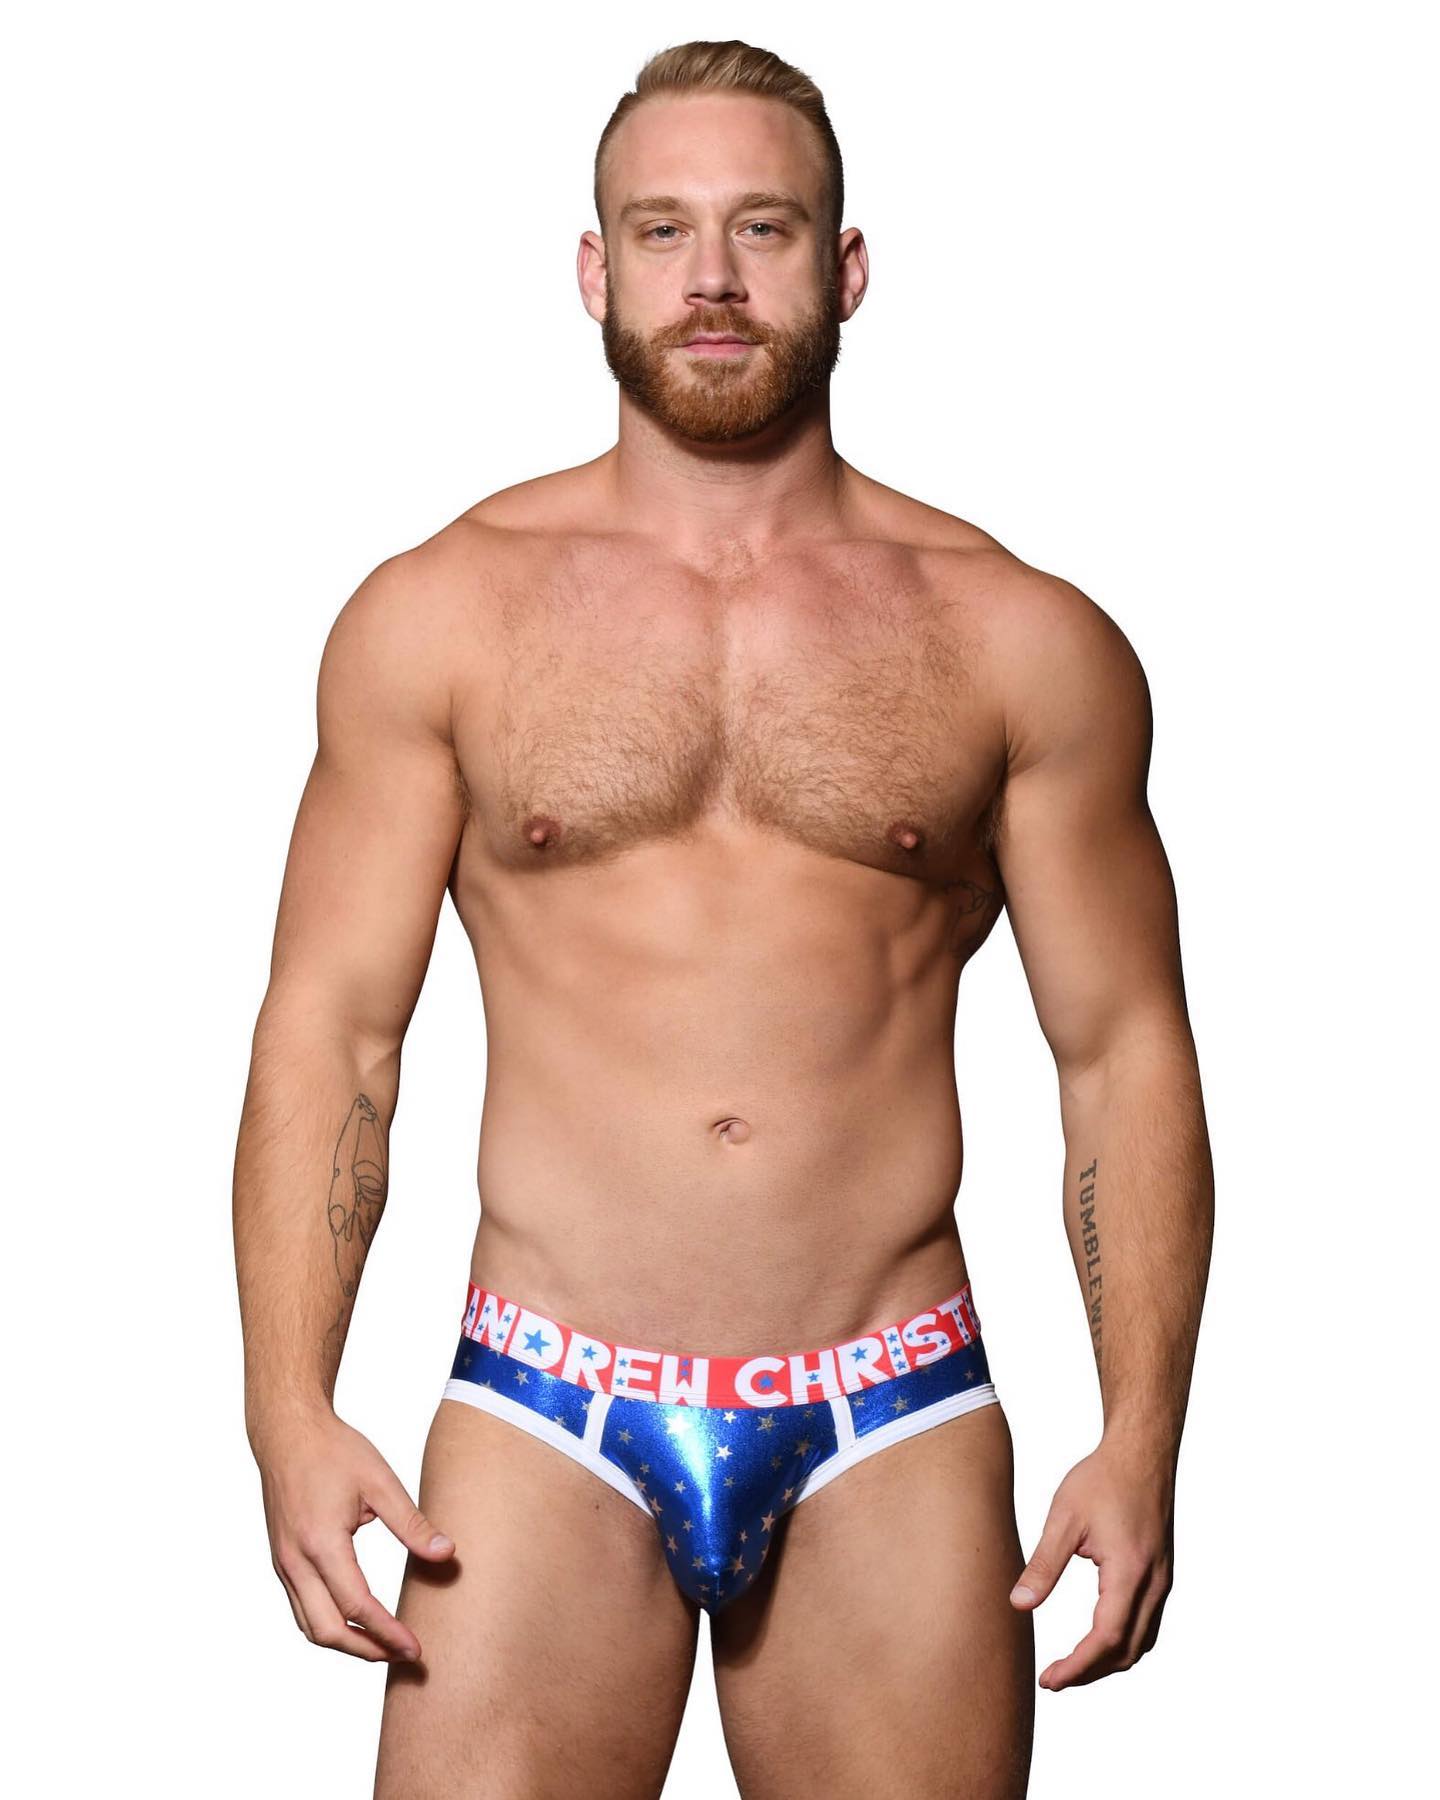 A hero is only as good as his undies, and this skimpy and glamorous pair is sure to make you the best in the league! Check out the Andrew Christian Superhero Briefs:
____
https://menandunderwear.com/shop/underwear/andrew-christian-superhero-brief-w-almost-naked